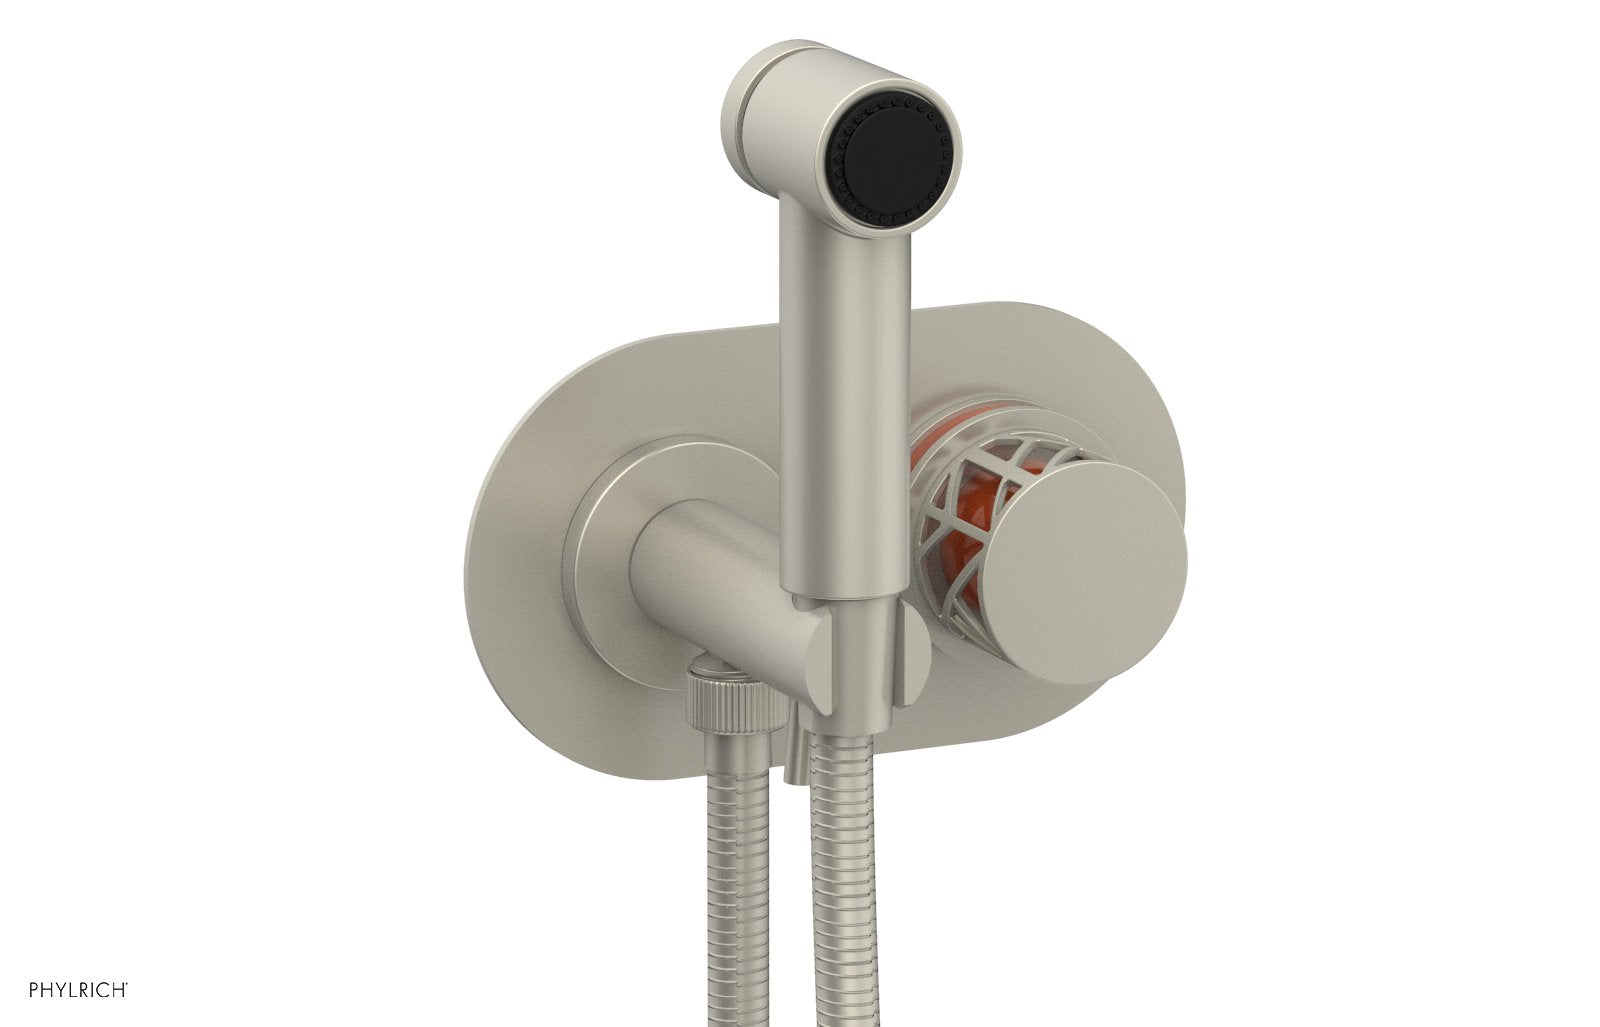 Phylrich JOLIE Wall Mounted Bidet, Round Handle with "Orange" Accents